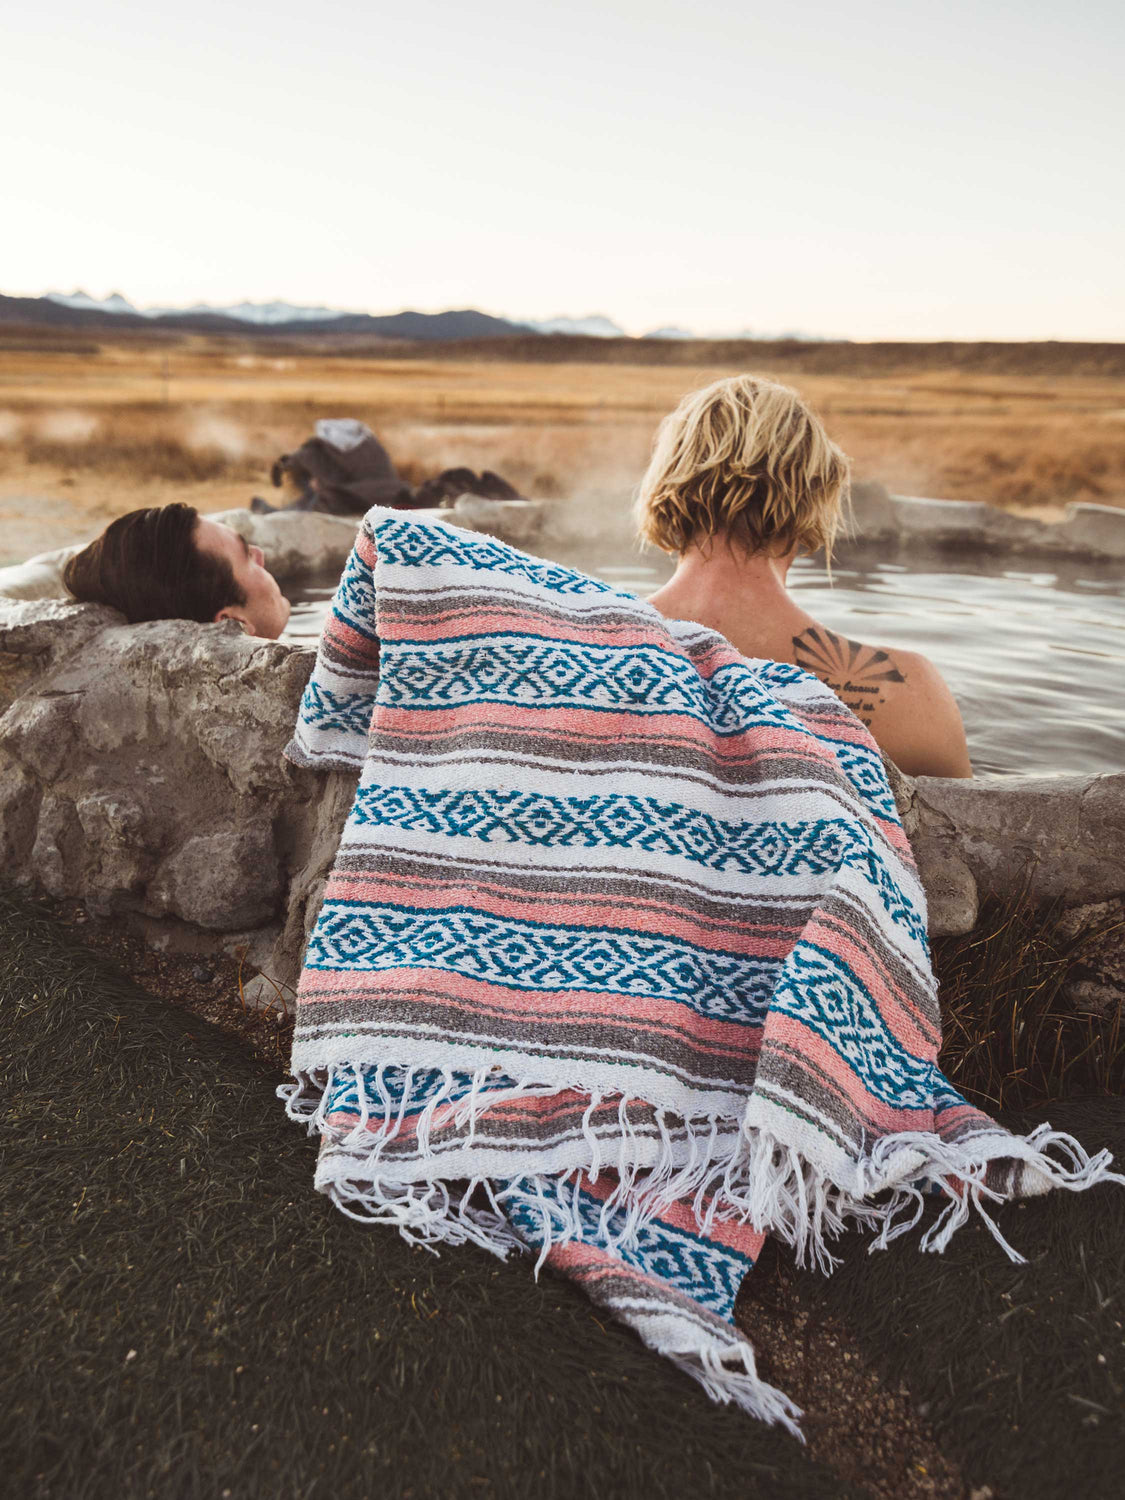 A man and a woman relaxing in a hot spring with a blue, pink, and gray traditional Mexican blanket draped over the side of the spring.